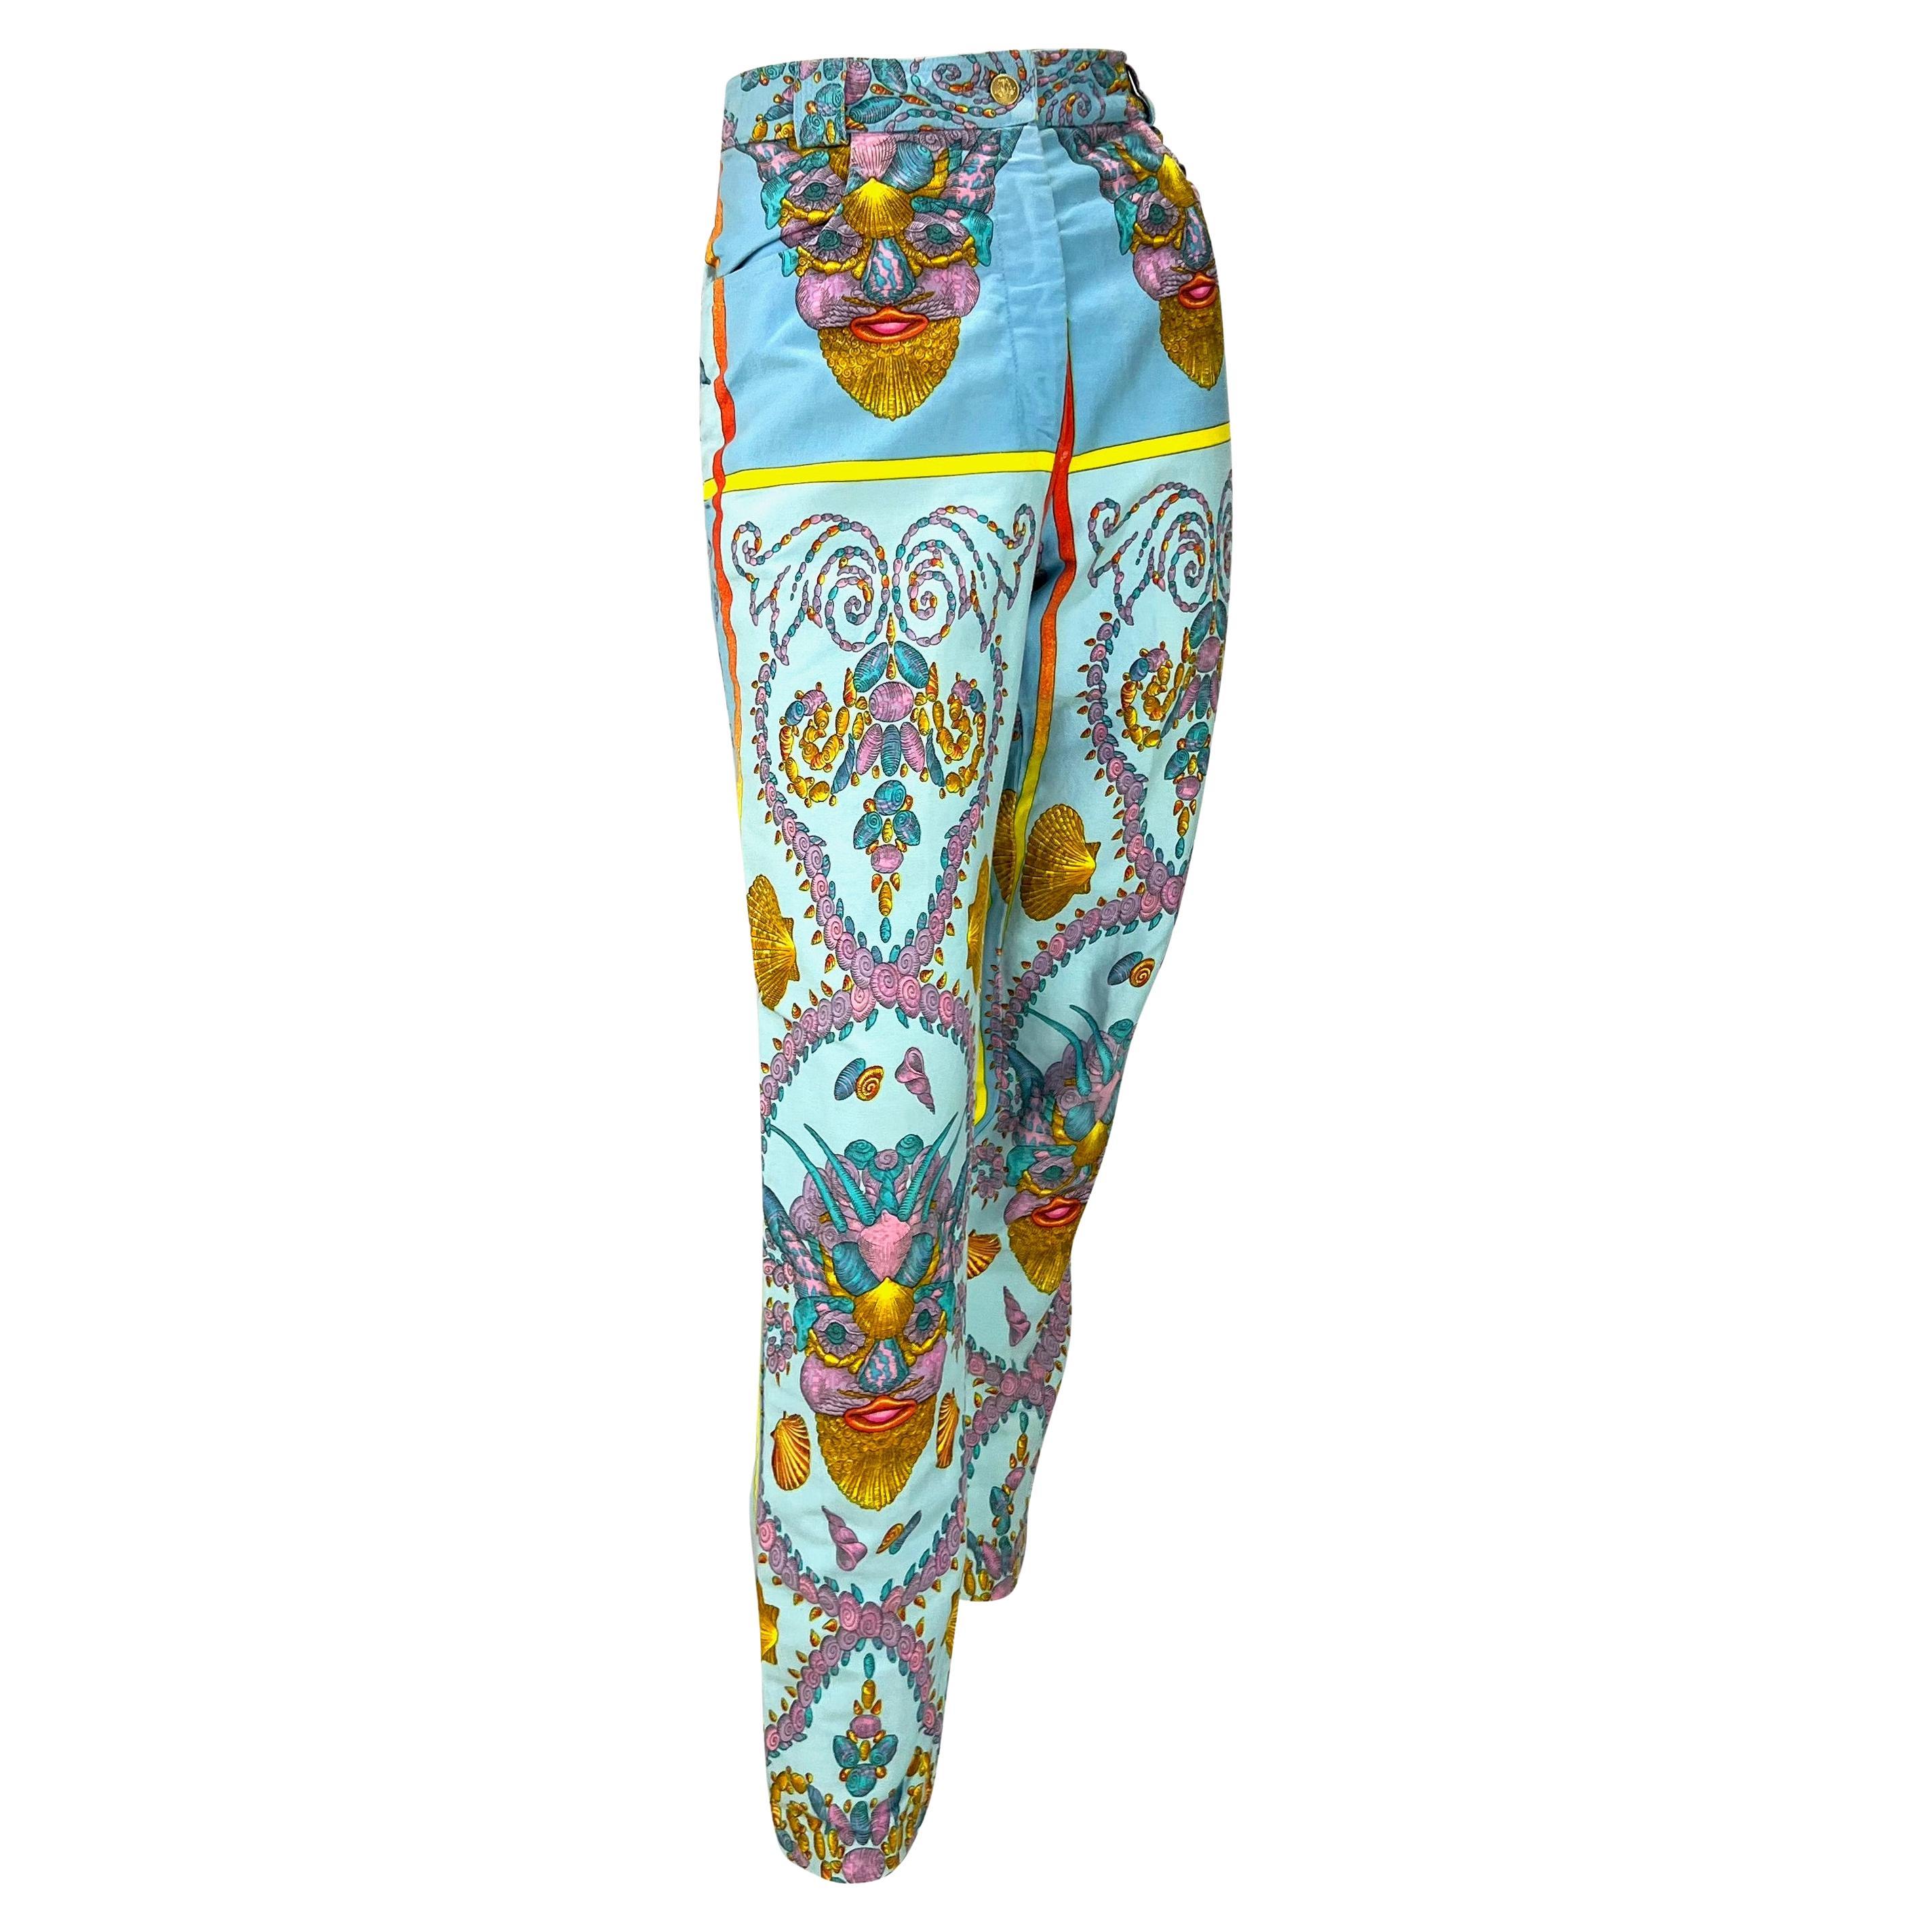 S/S 1992 Gianni Versace Couture Runway Baby Blue Seashell Print Jeans In Good Condition For Sale In West Hollywood, CA